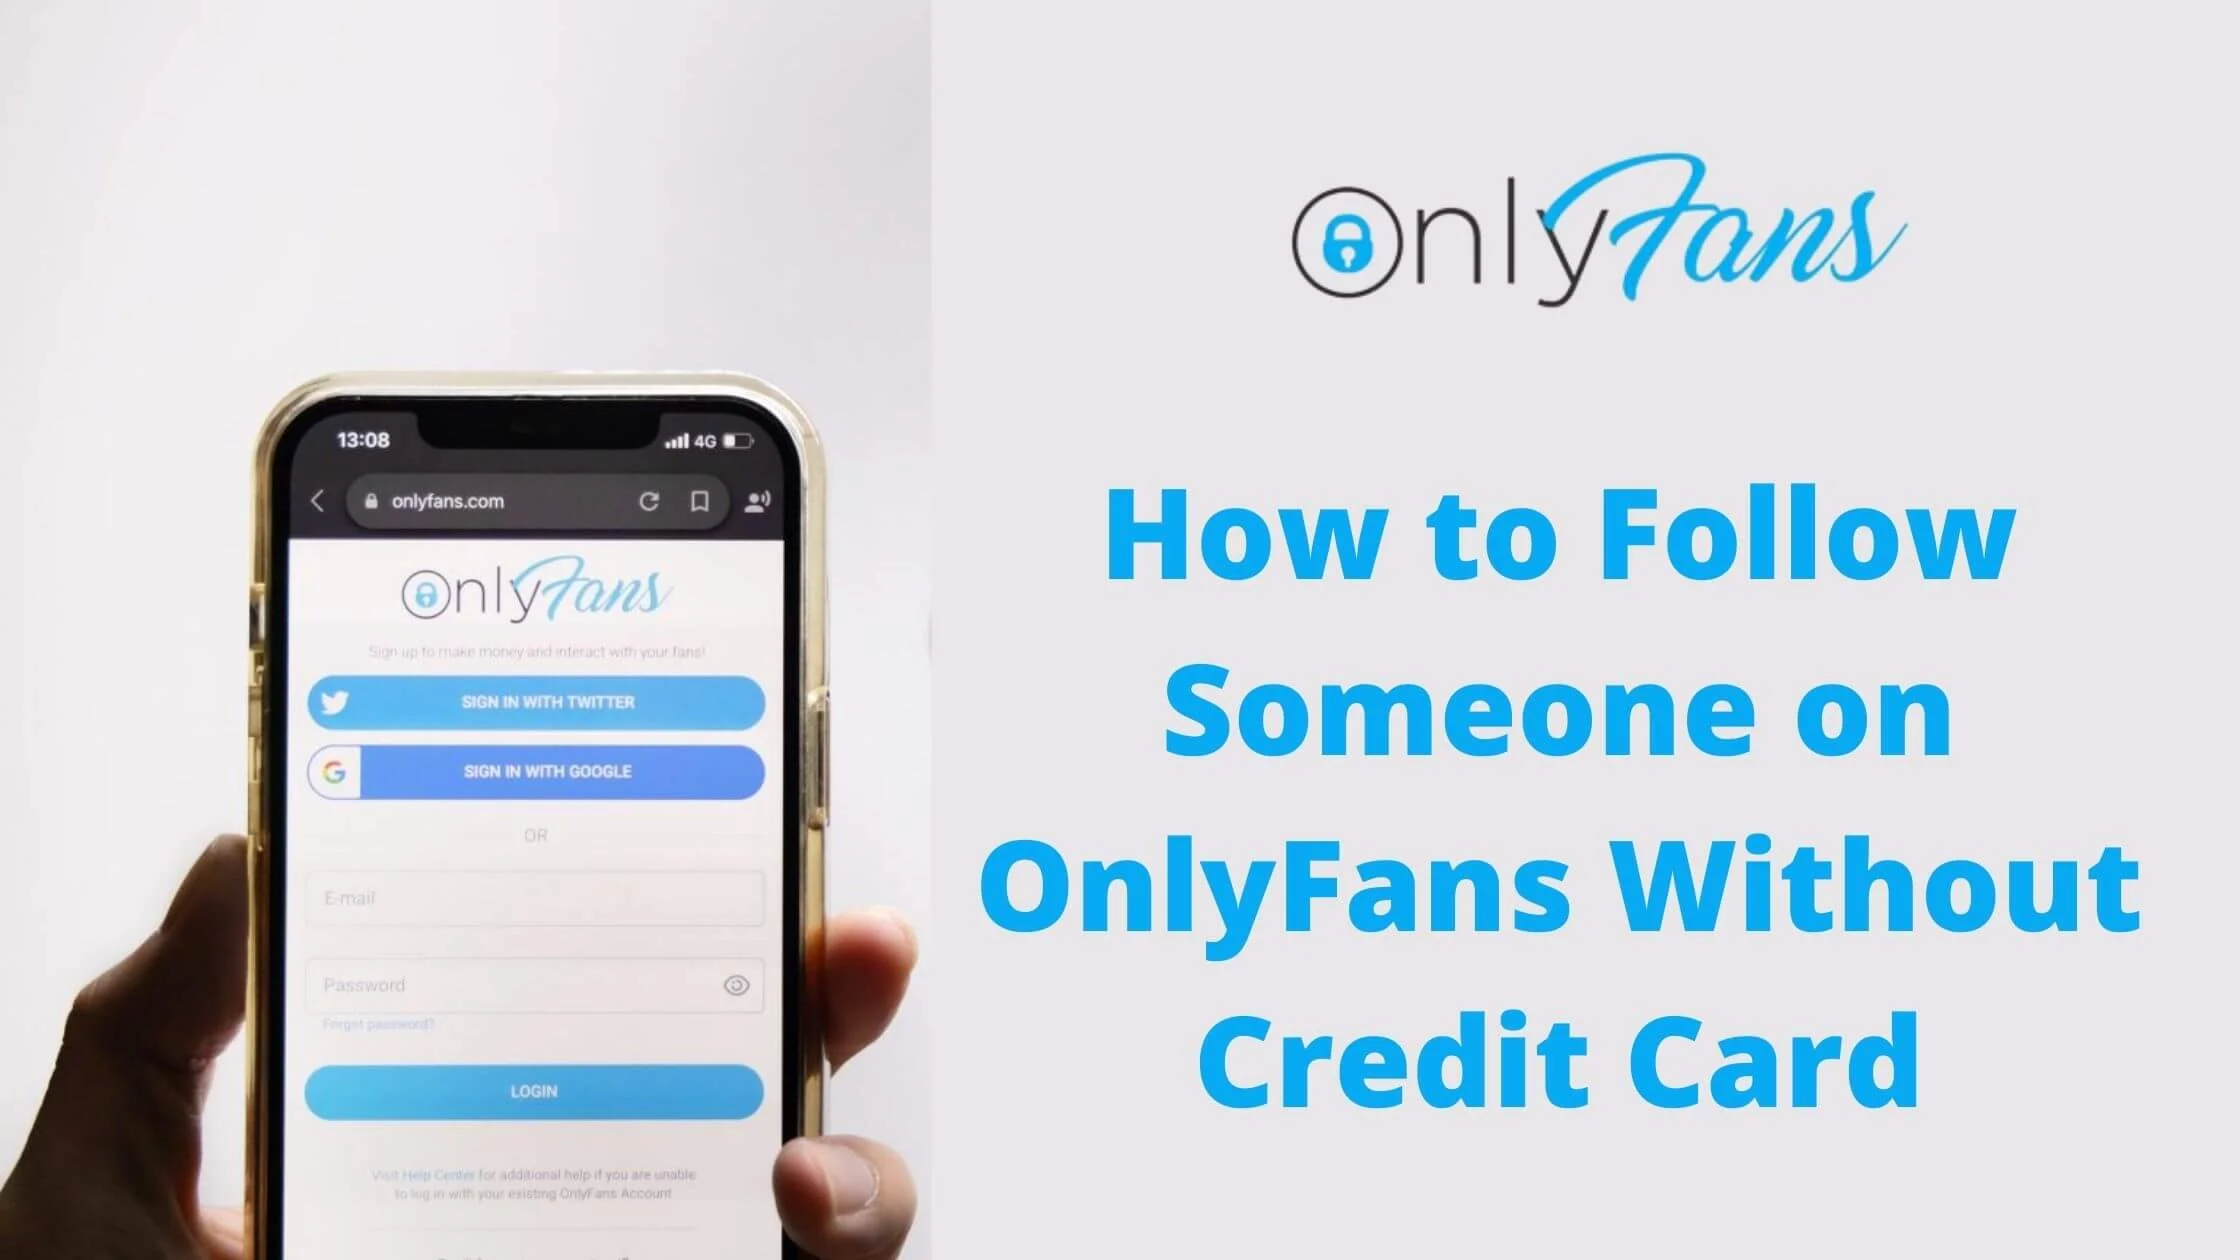 How can i use onlyfans without a credit card